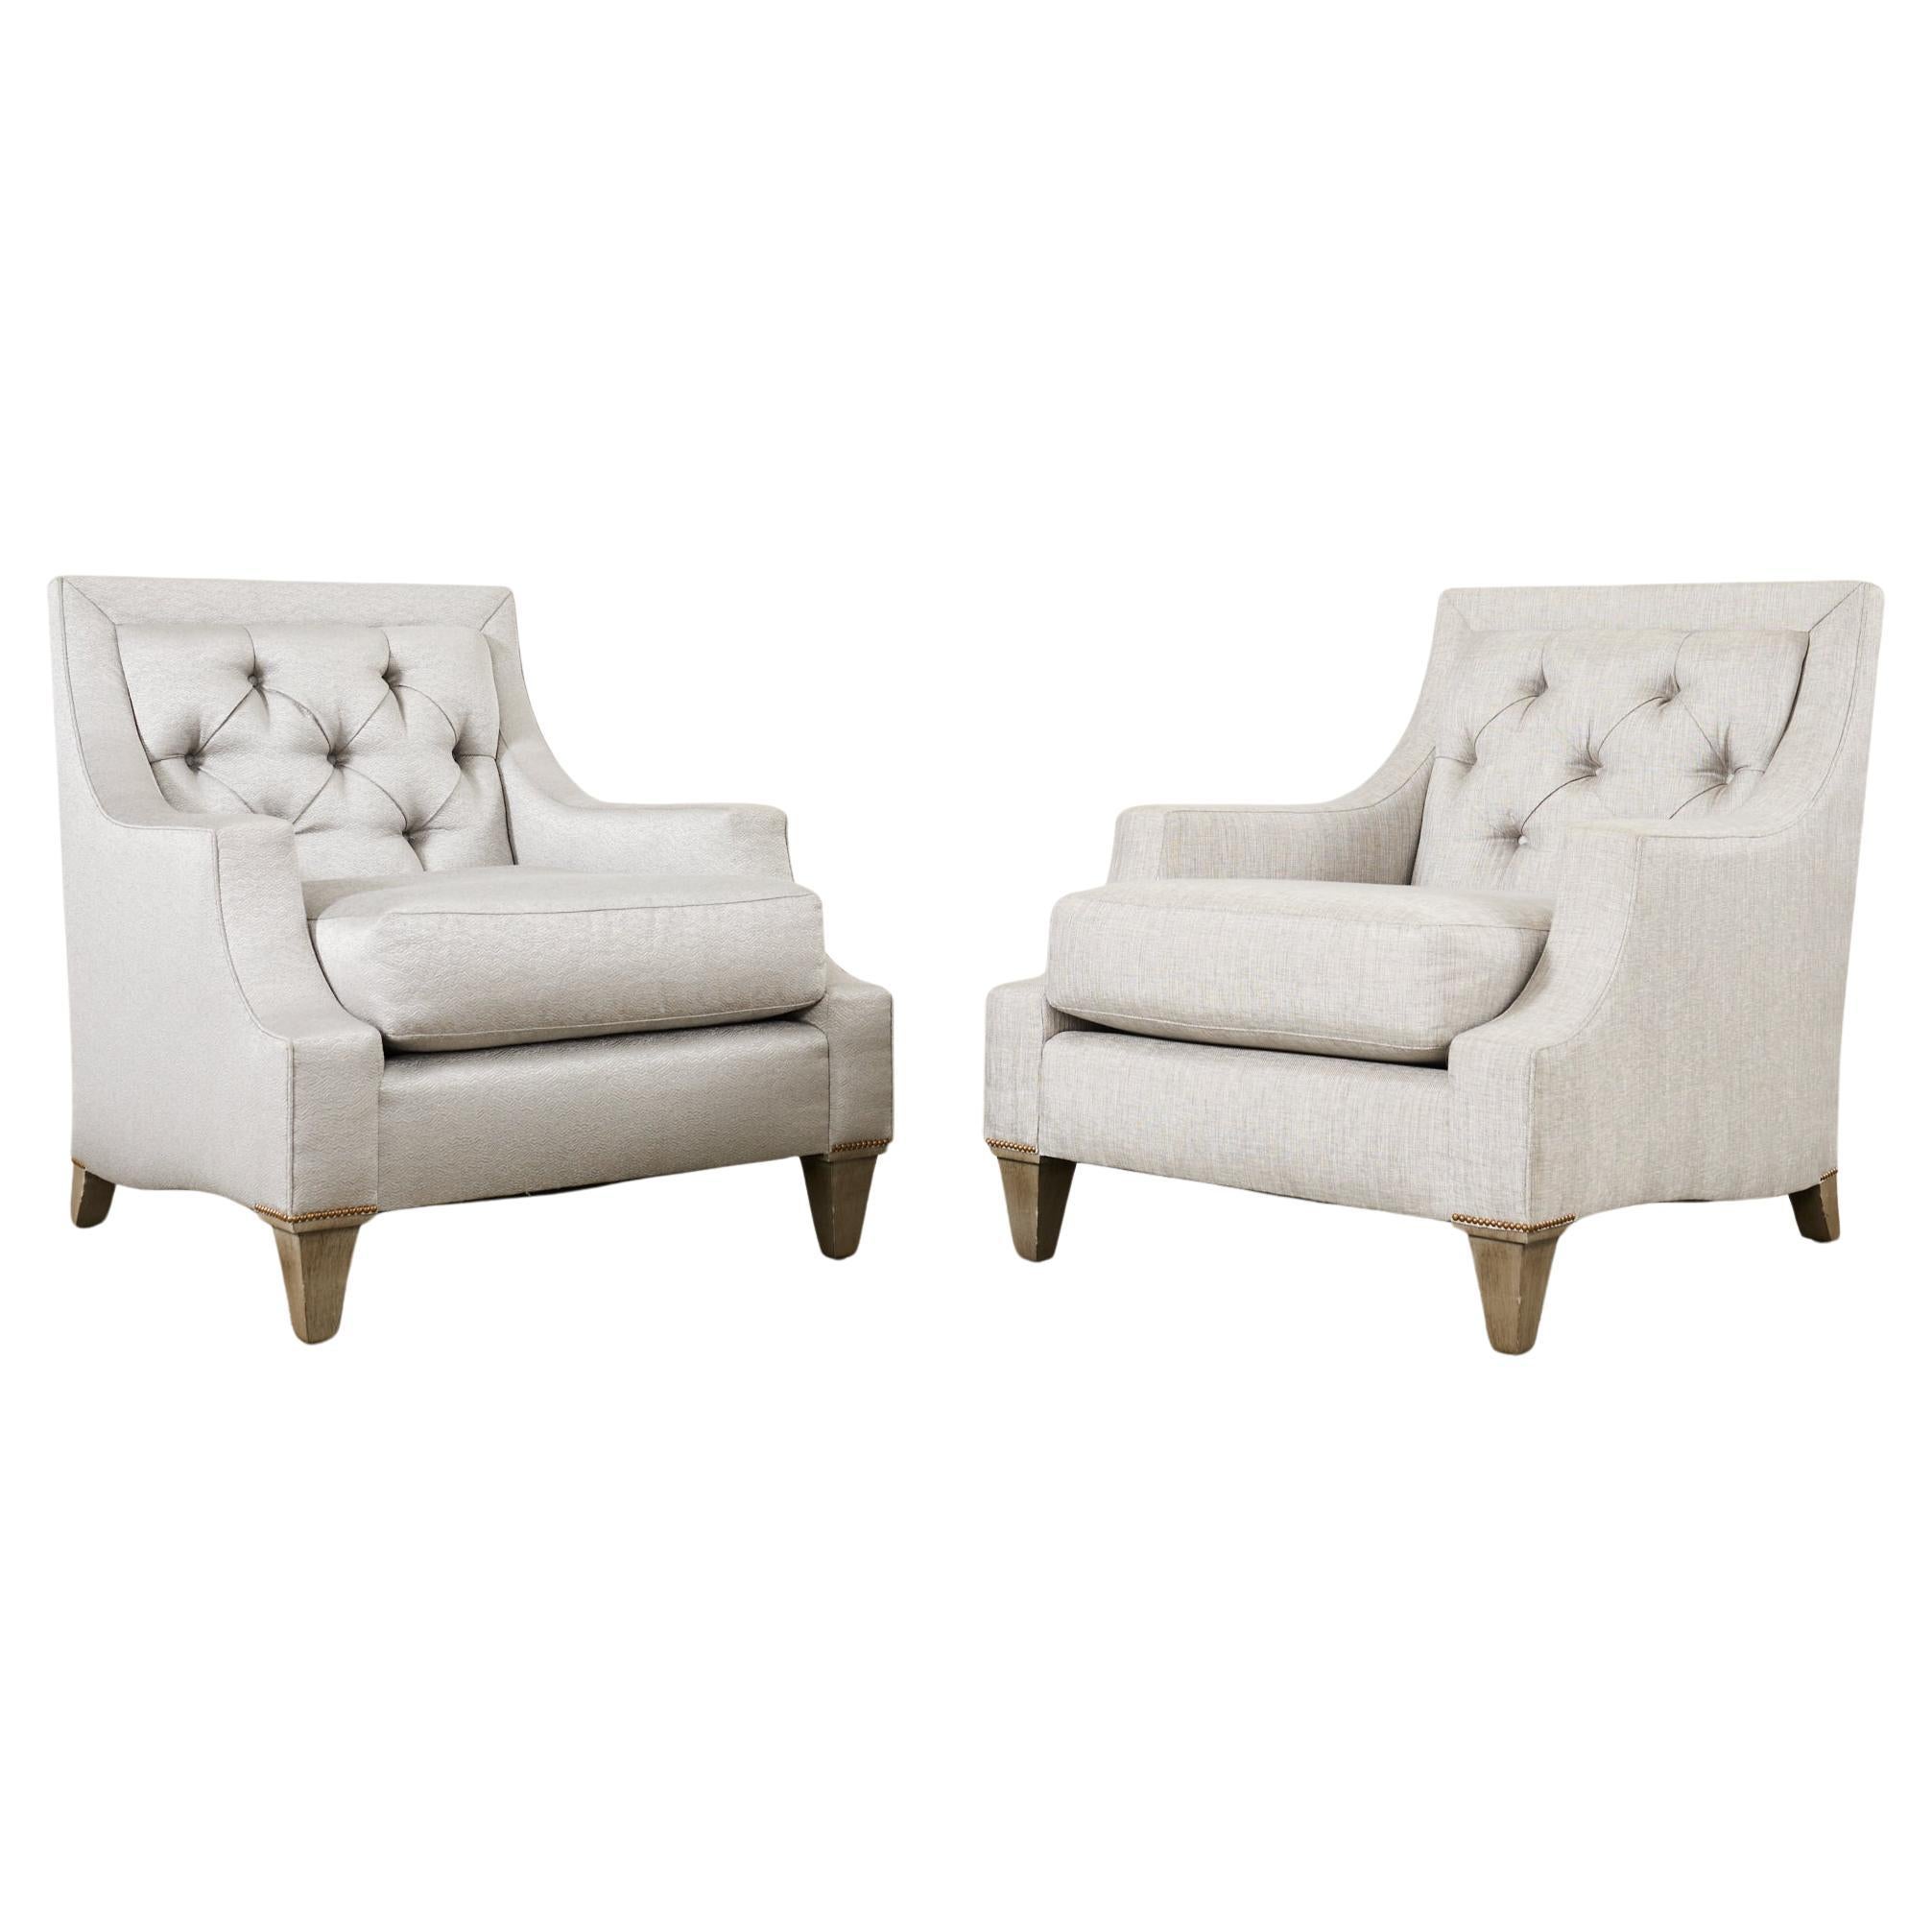 Pair of Thomas Pheasant for Baker Max Tufted Club Chairs